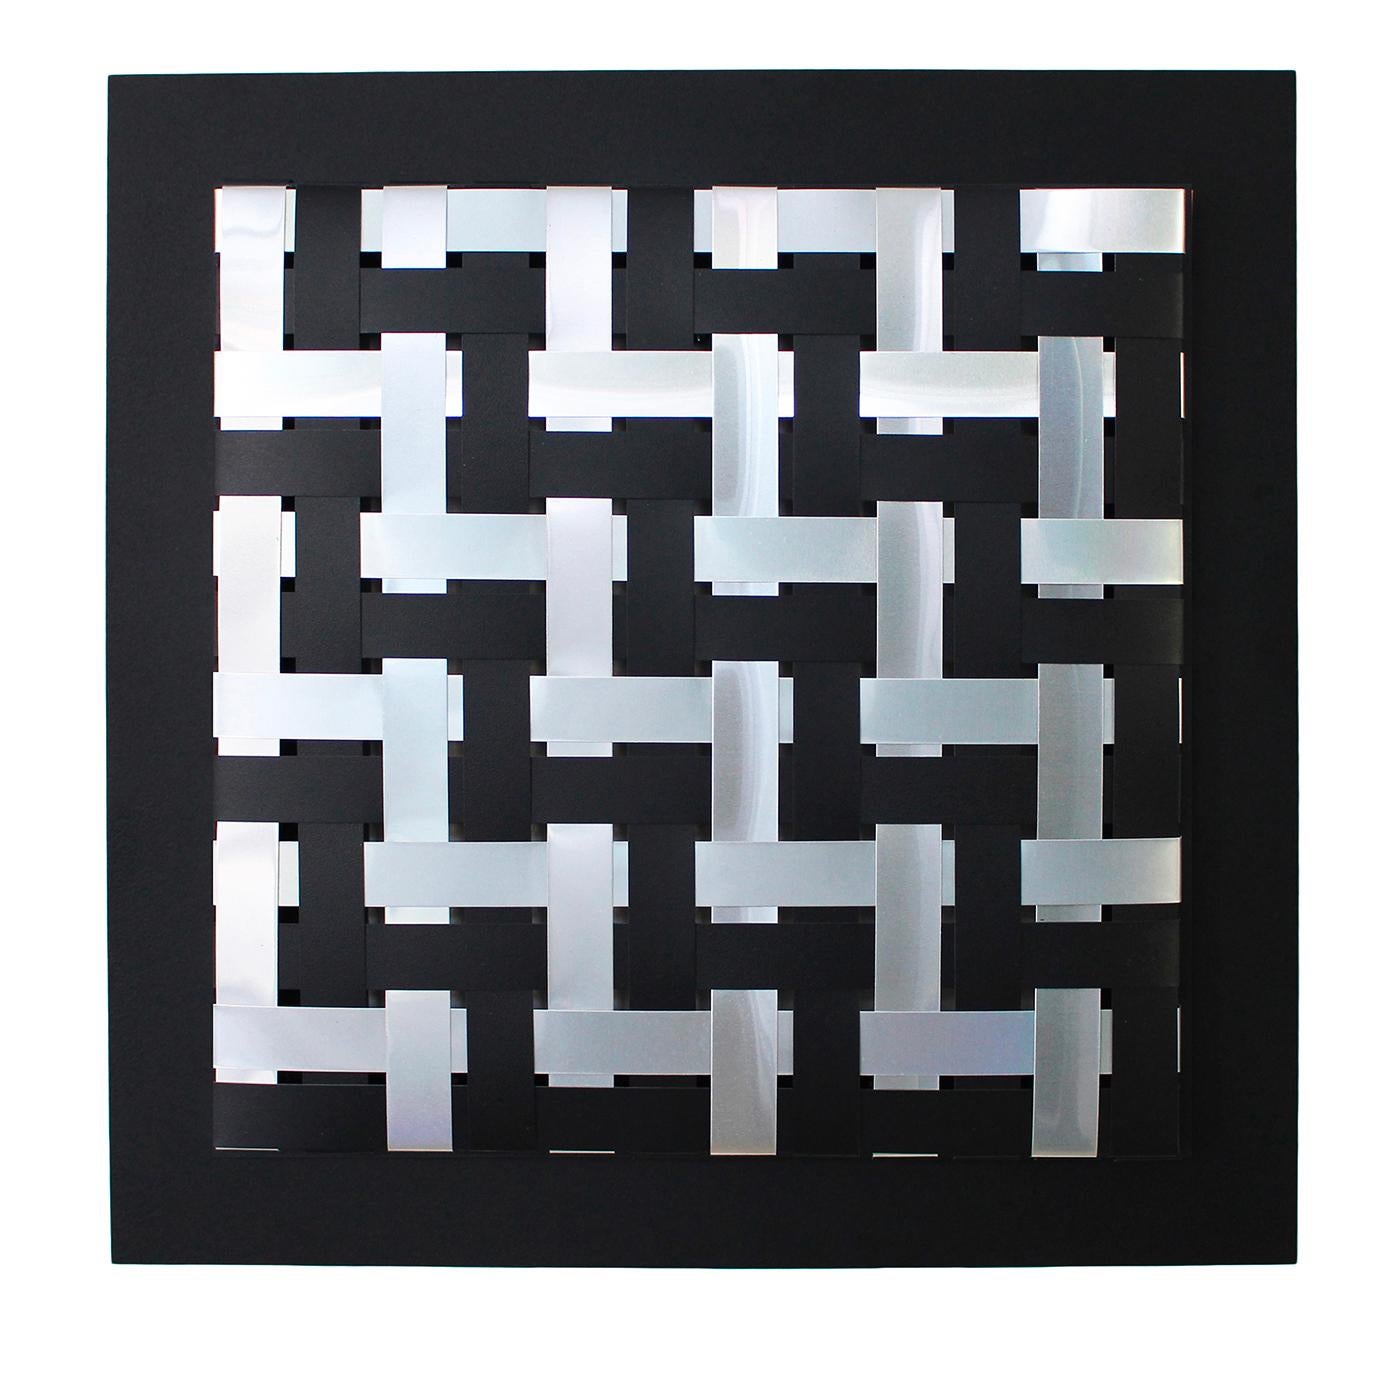 An extraordinary piece of op art, this wall decor by Splot Design will make for a bold and iconic addition to a contemporary interior. Eclectic and singular, it exudes a sophisticated vintage allure. Handmade of metal, it can be hung in any